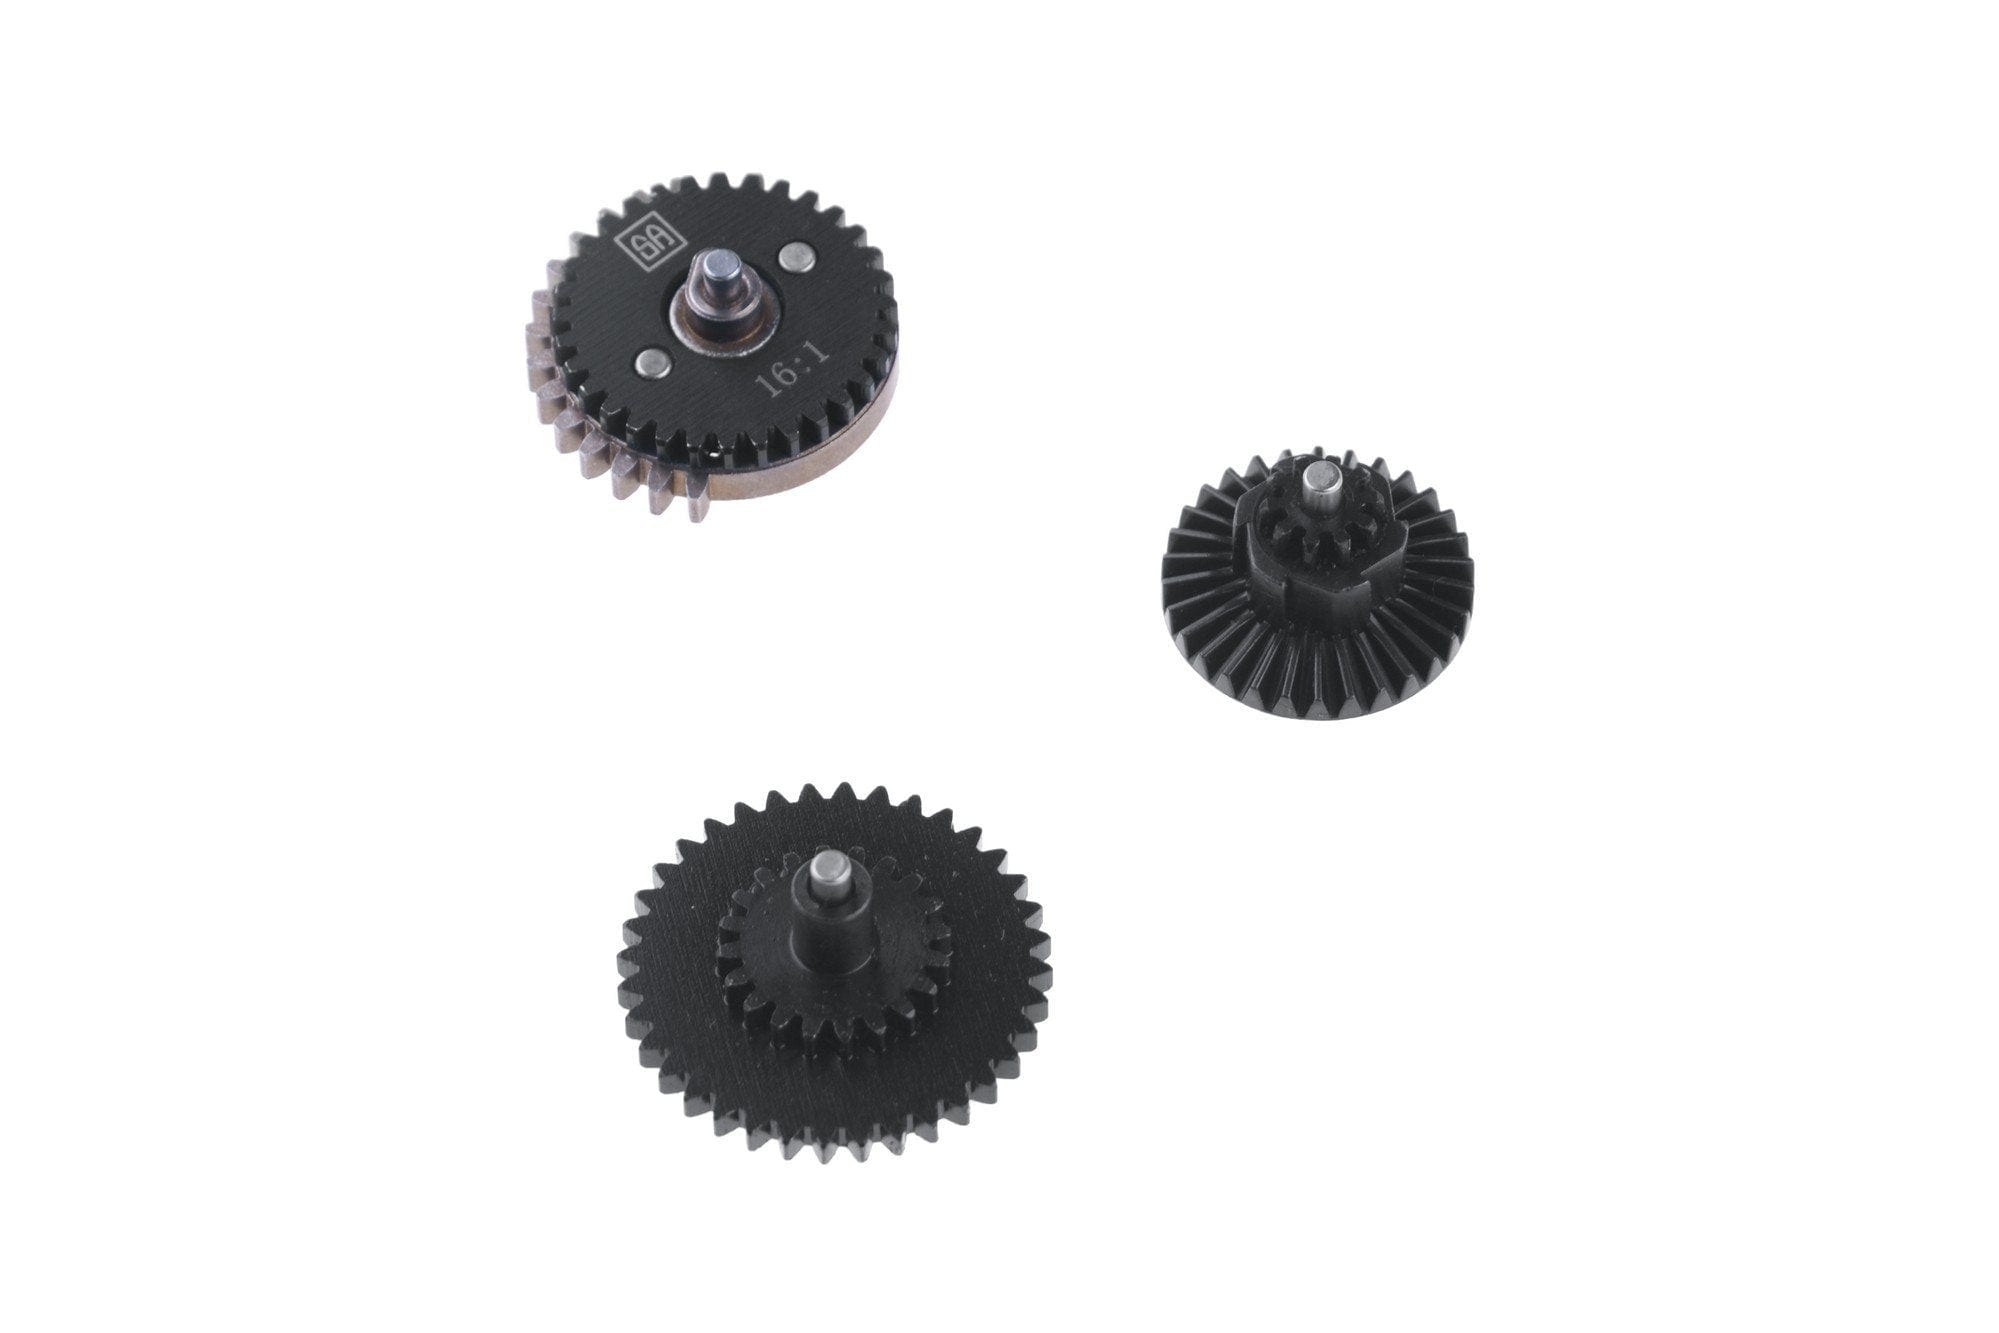 A set of steel gears CNC 16_1 by Specna Arms on Airsoft Mania Europe